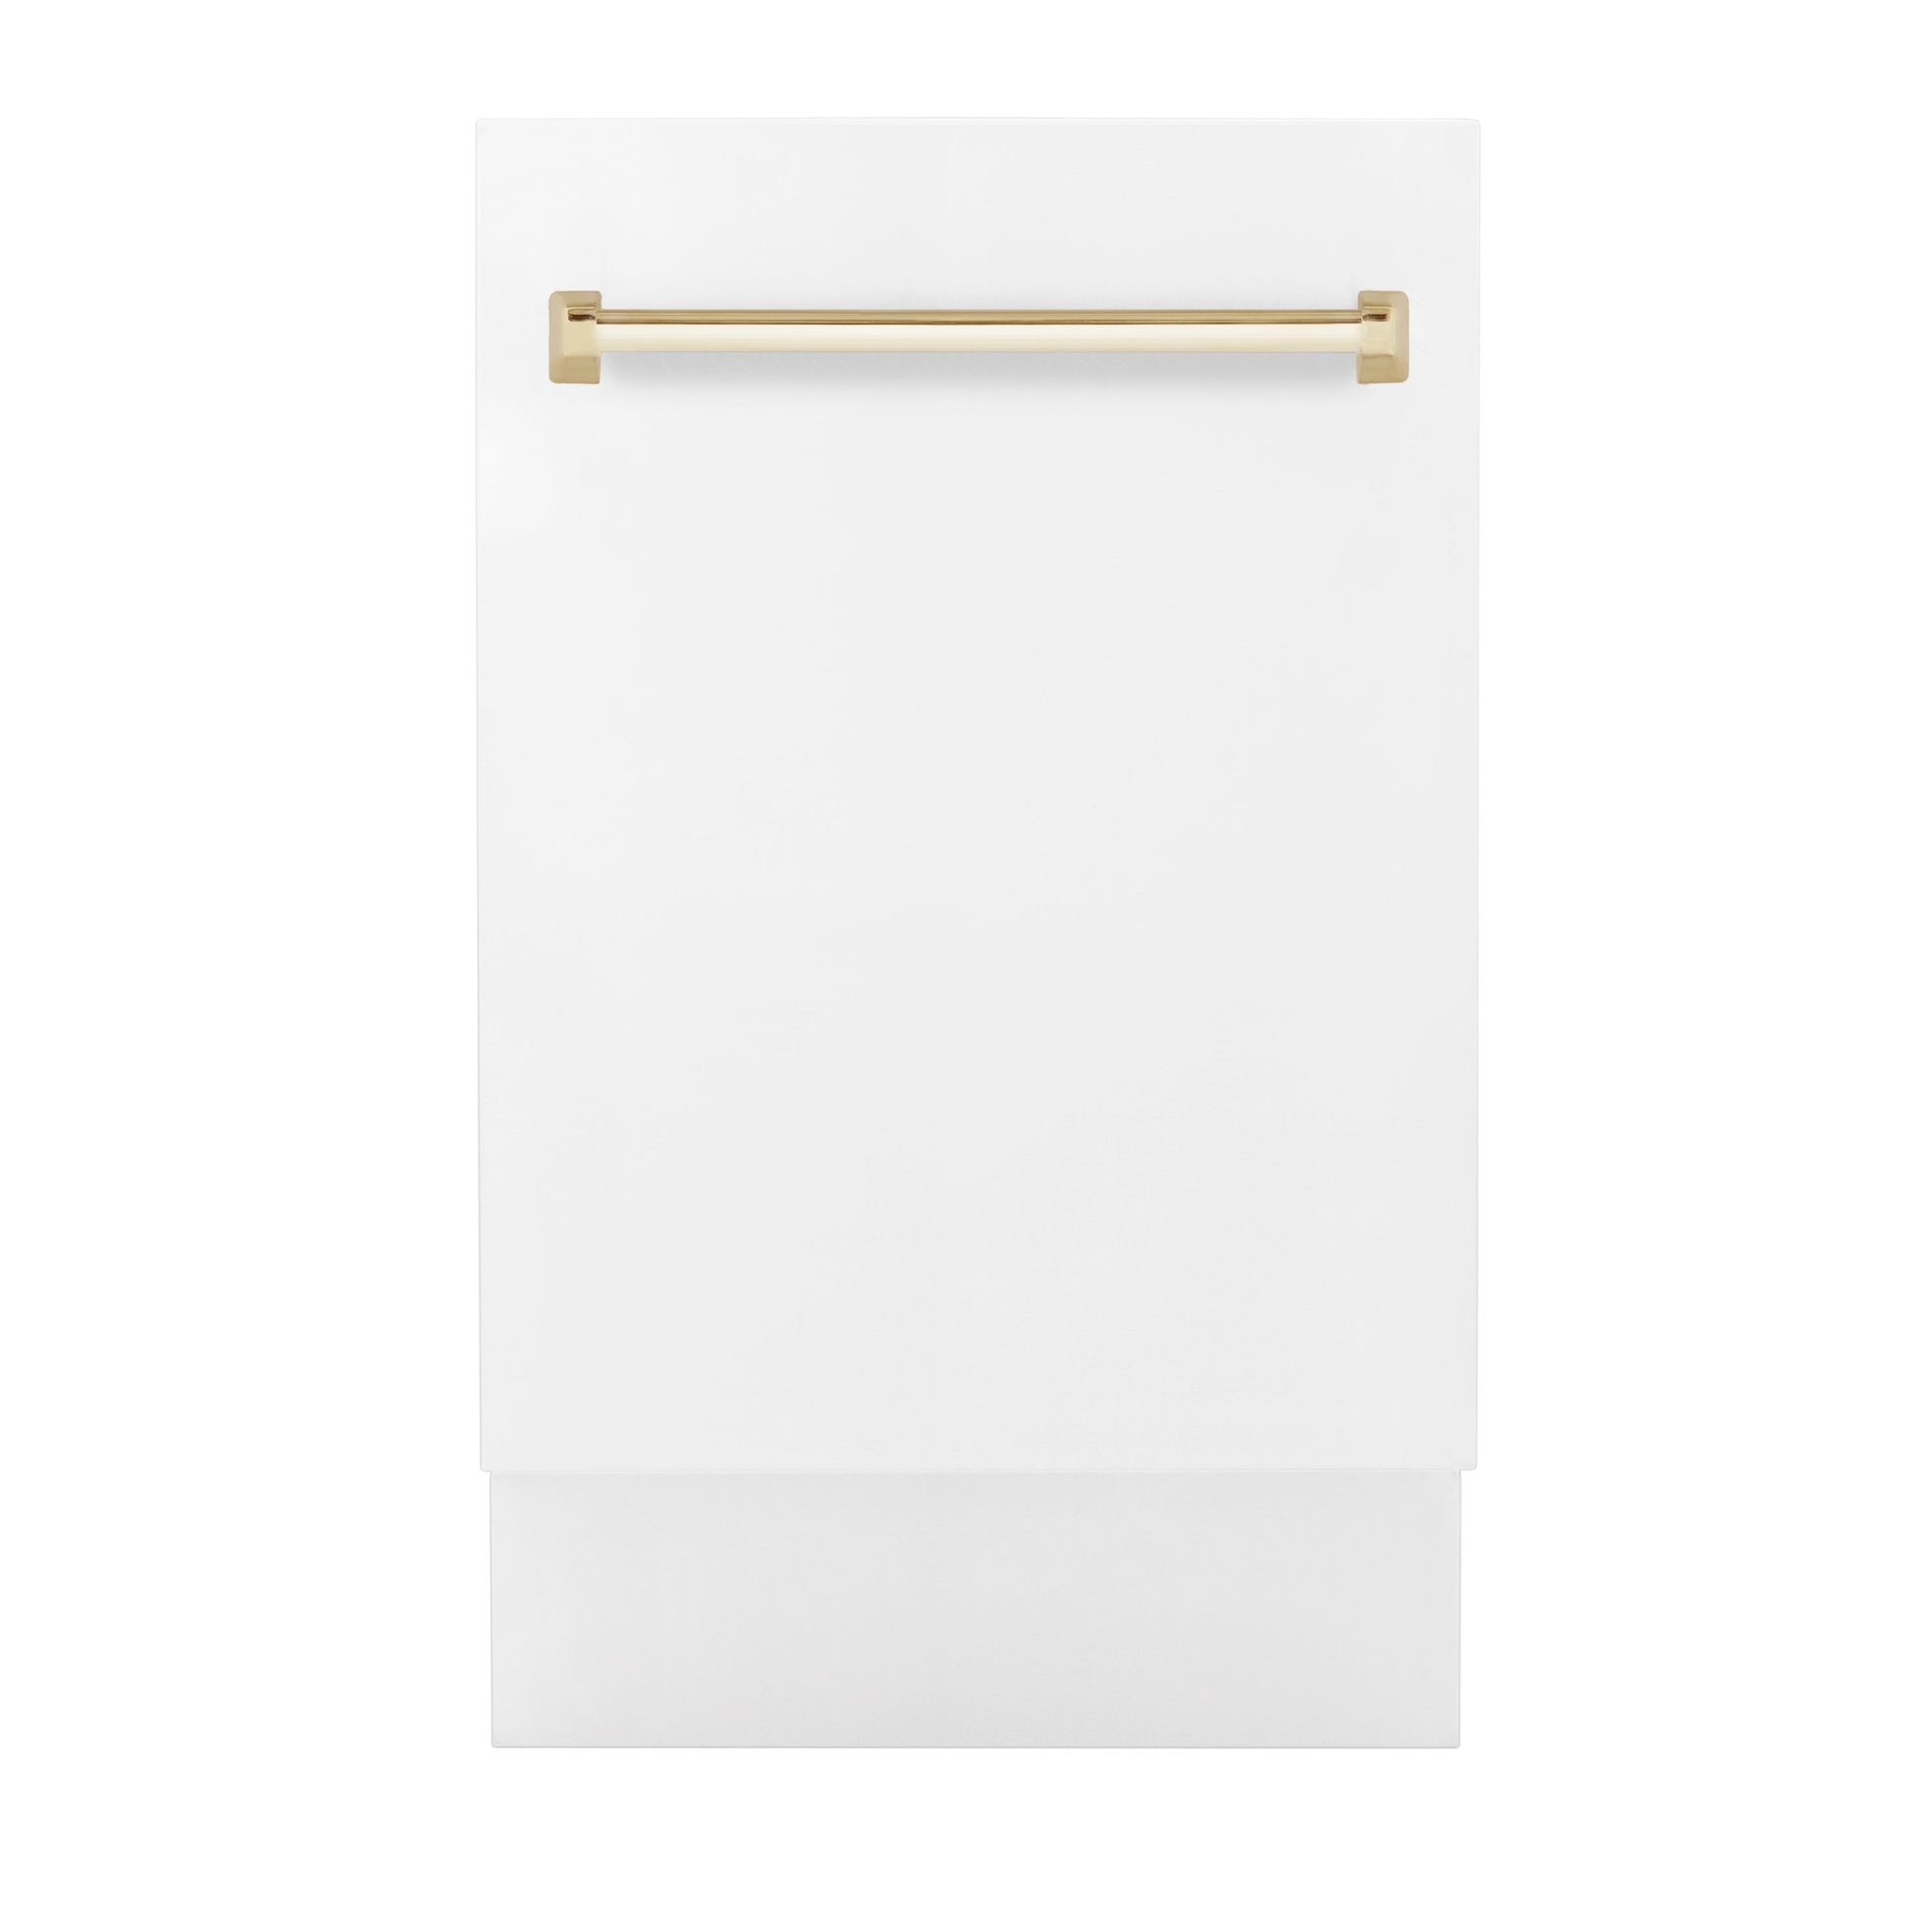 ZLINE Autograph Edition 18 in. Compact 3rd Rack Top Control Dishwasher in White Matte with Polished Gold Accent Handle, 51dBa (DWVZ-WM-18-G) front.